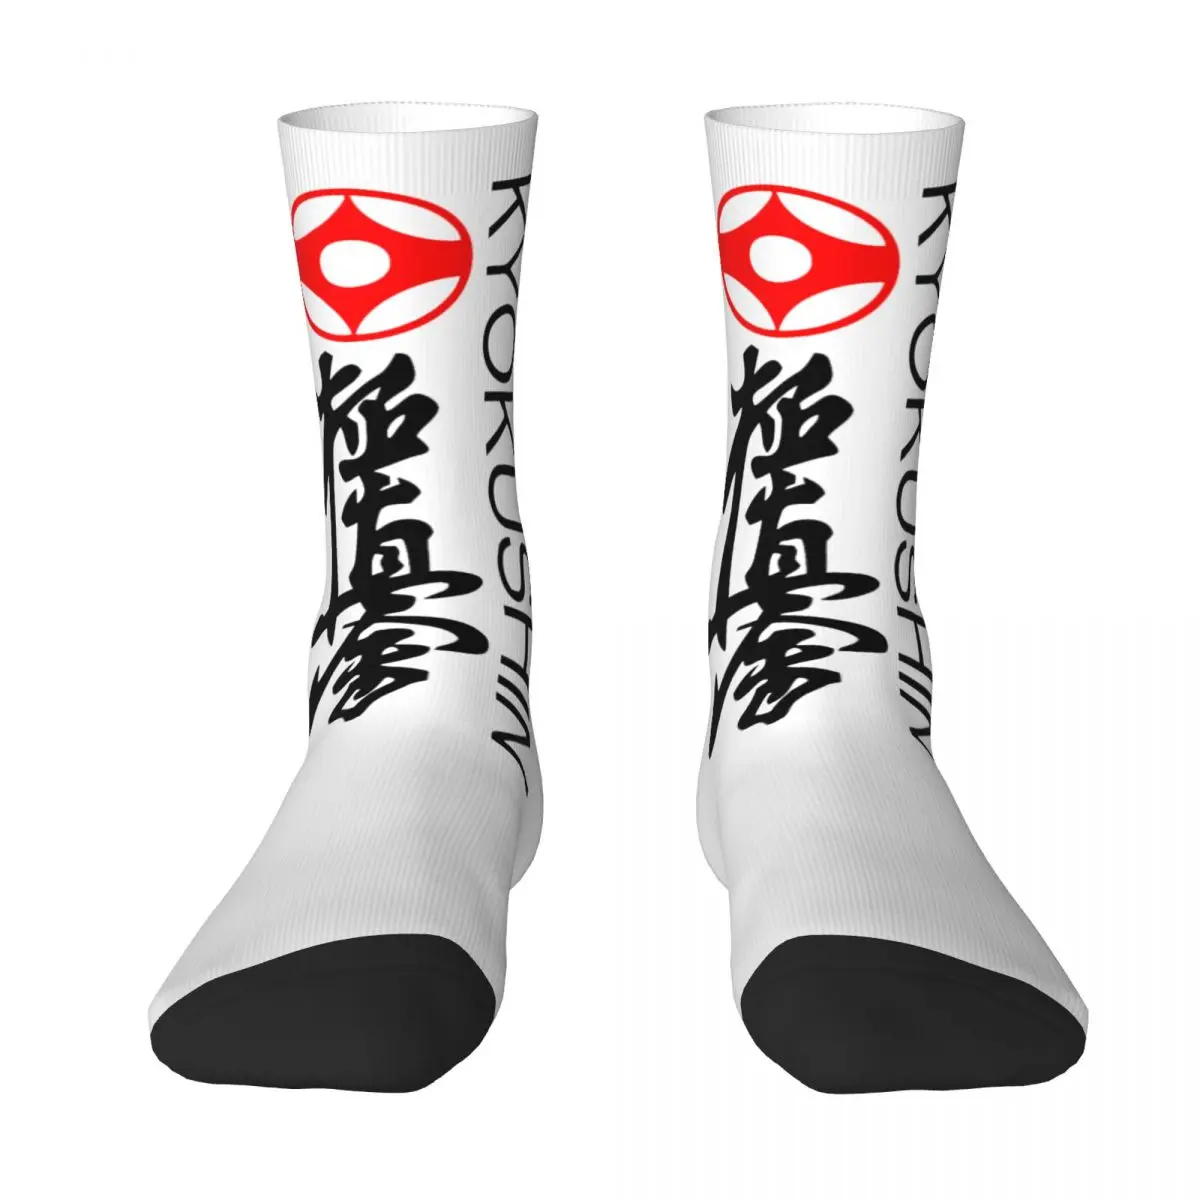 

Classic Karate Heart Martial Arts R343 Stocking BEST TO BUY Blanket roll Compression SocksFunny Joke